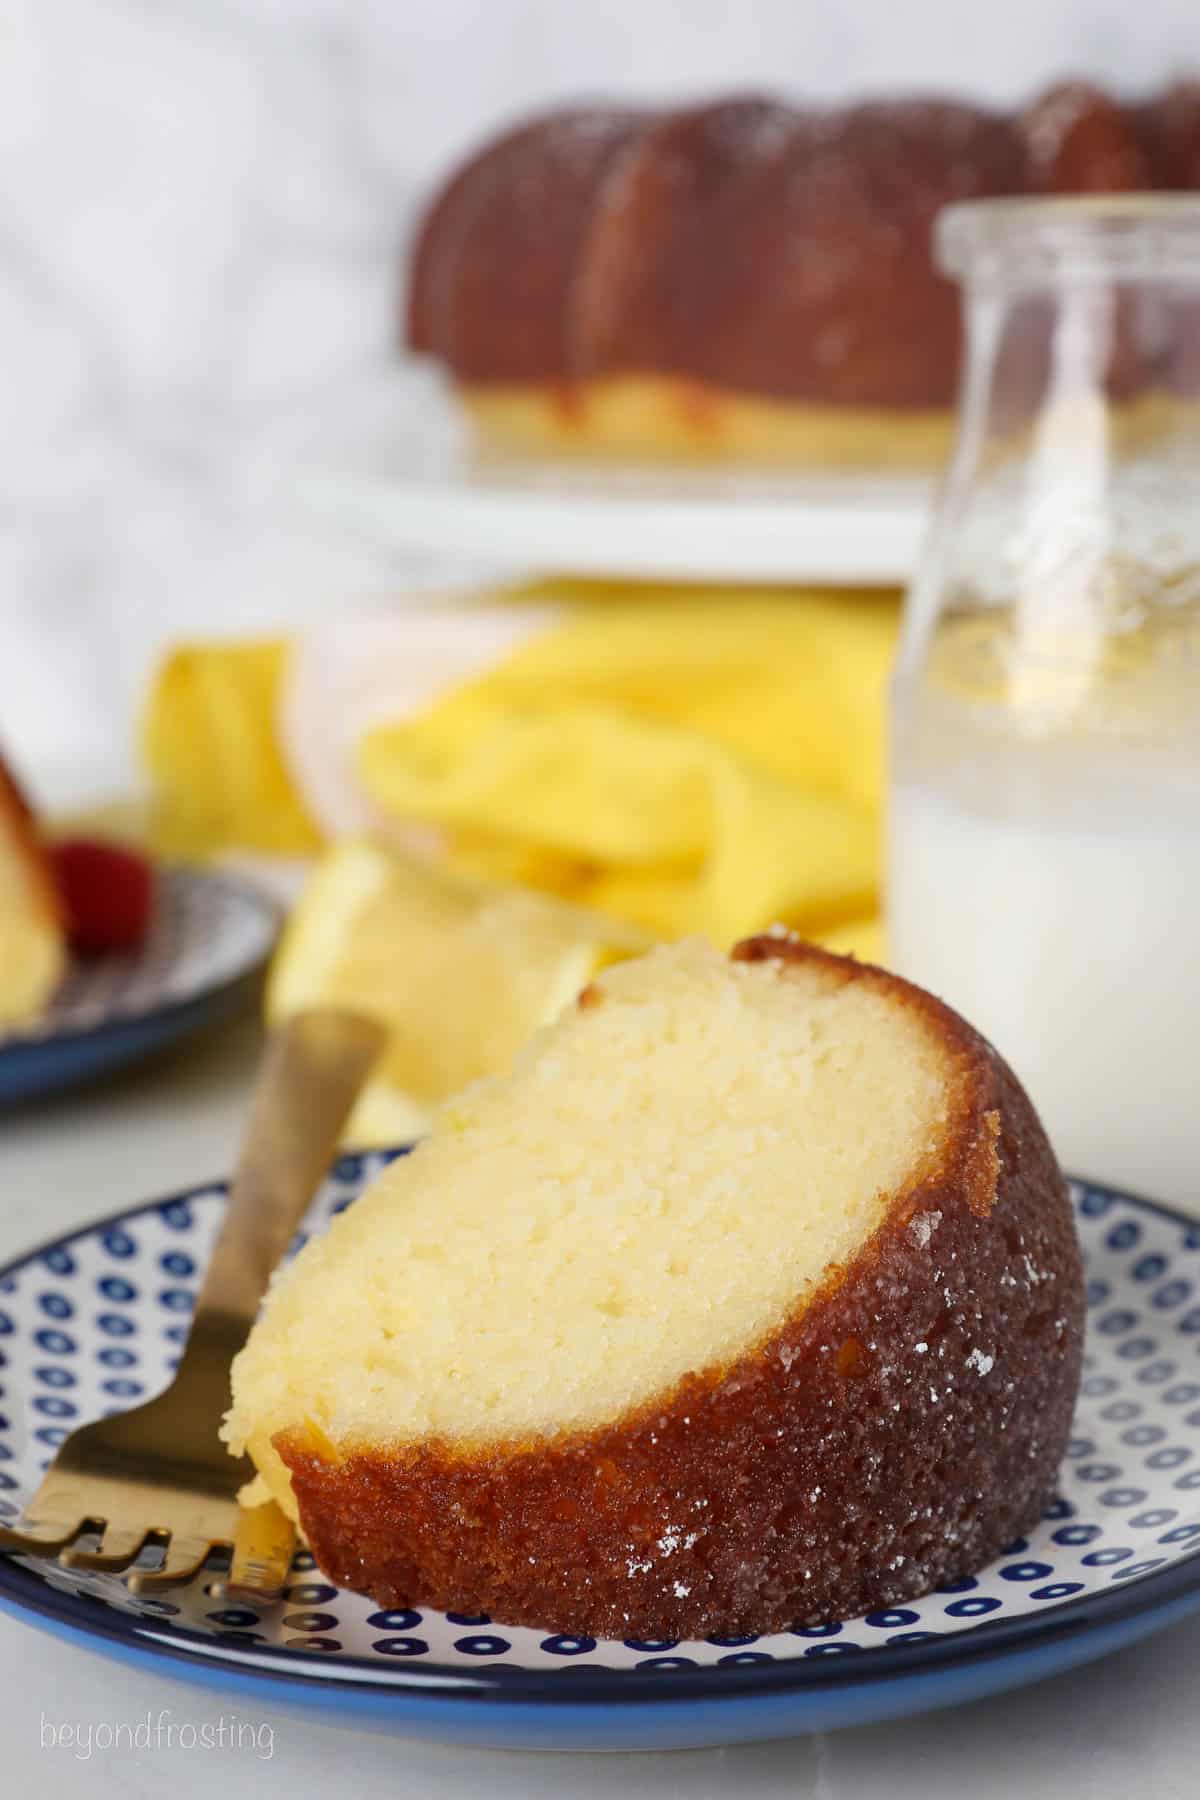 A slice of lemon drizzle cake on a plate next to a fork, with a jug of milk and a bundt cake on a cake stand in the background.